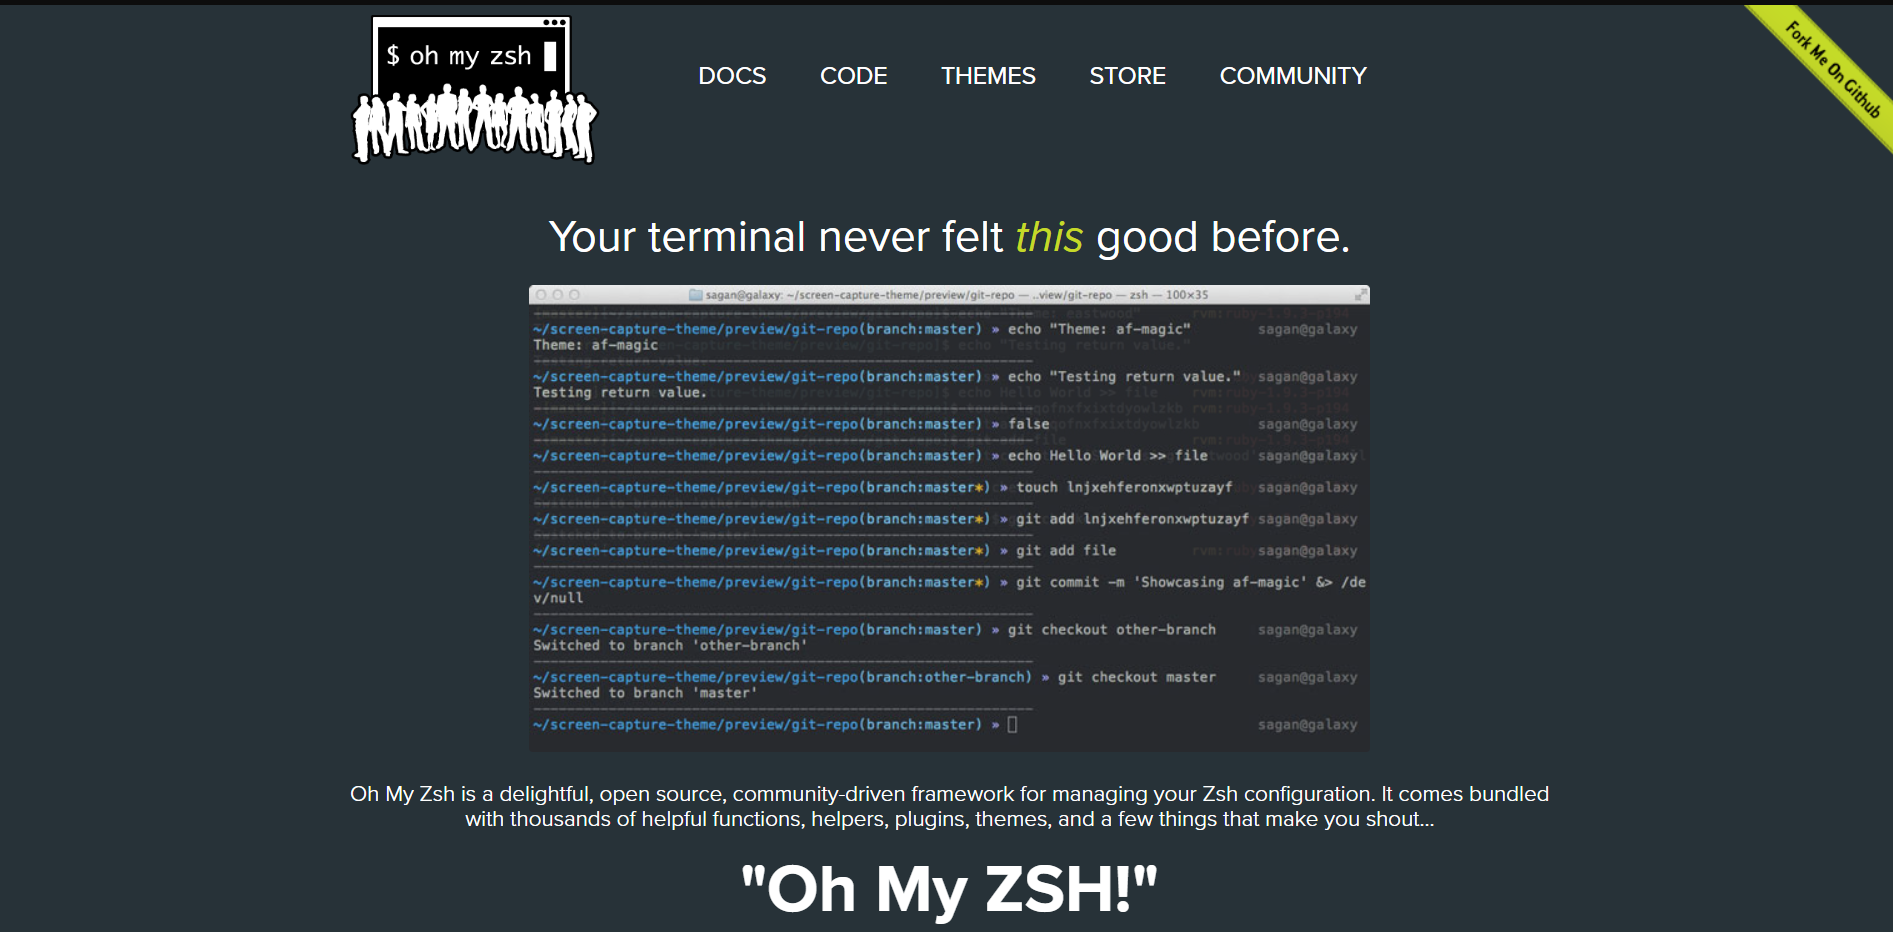 Oh My Zsh landing page